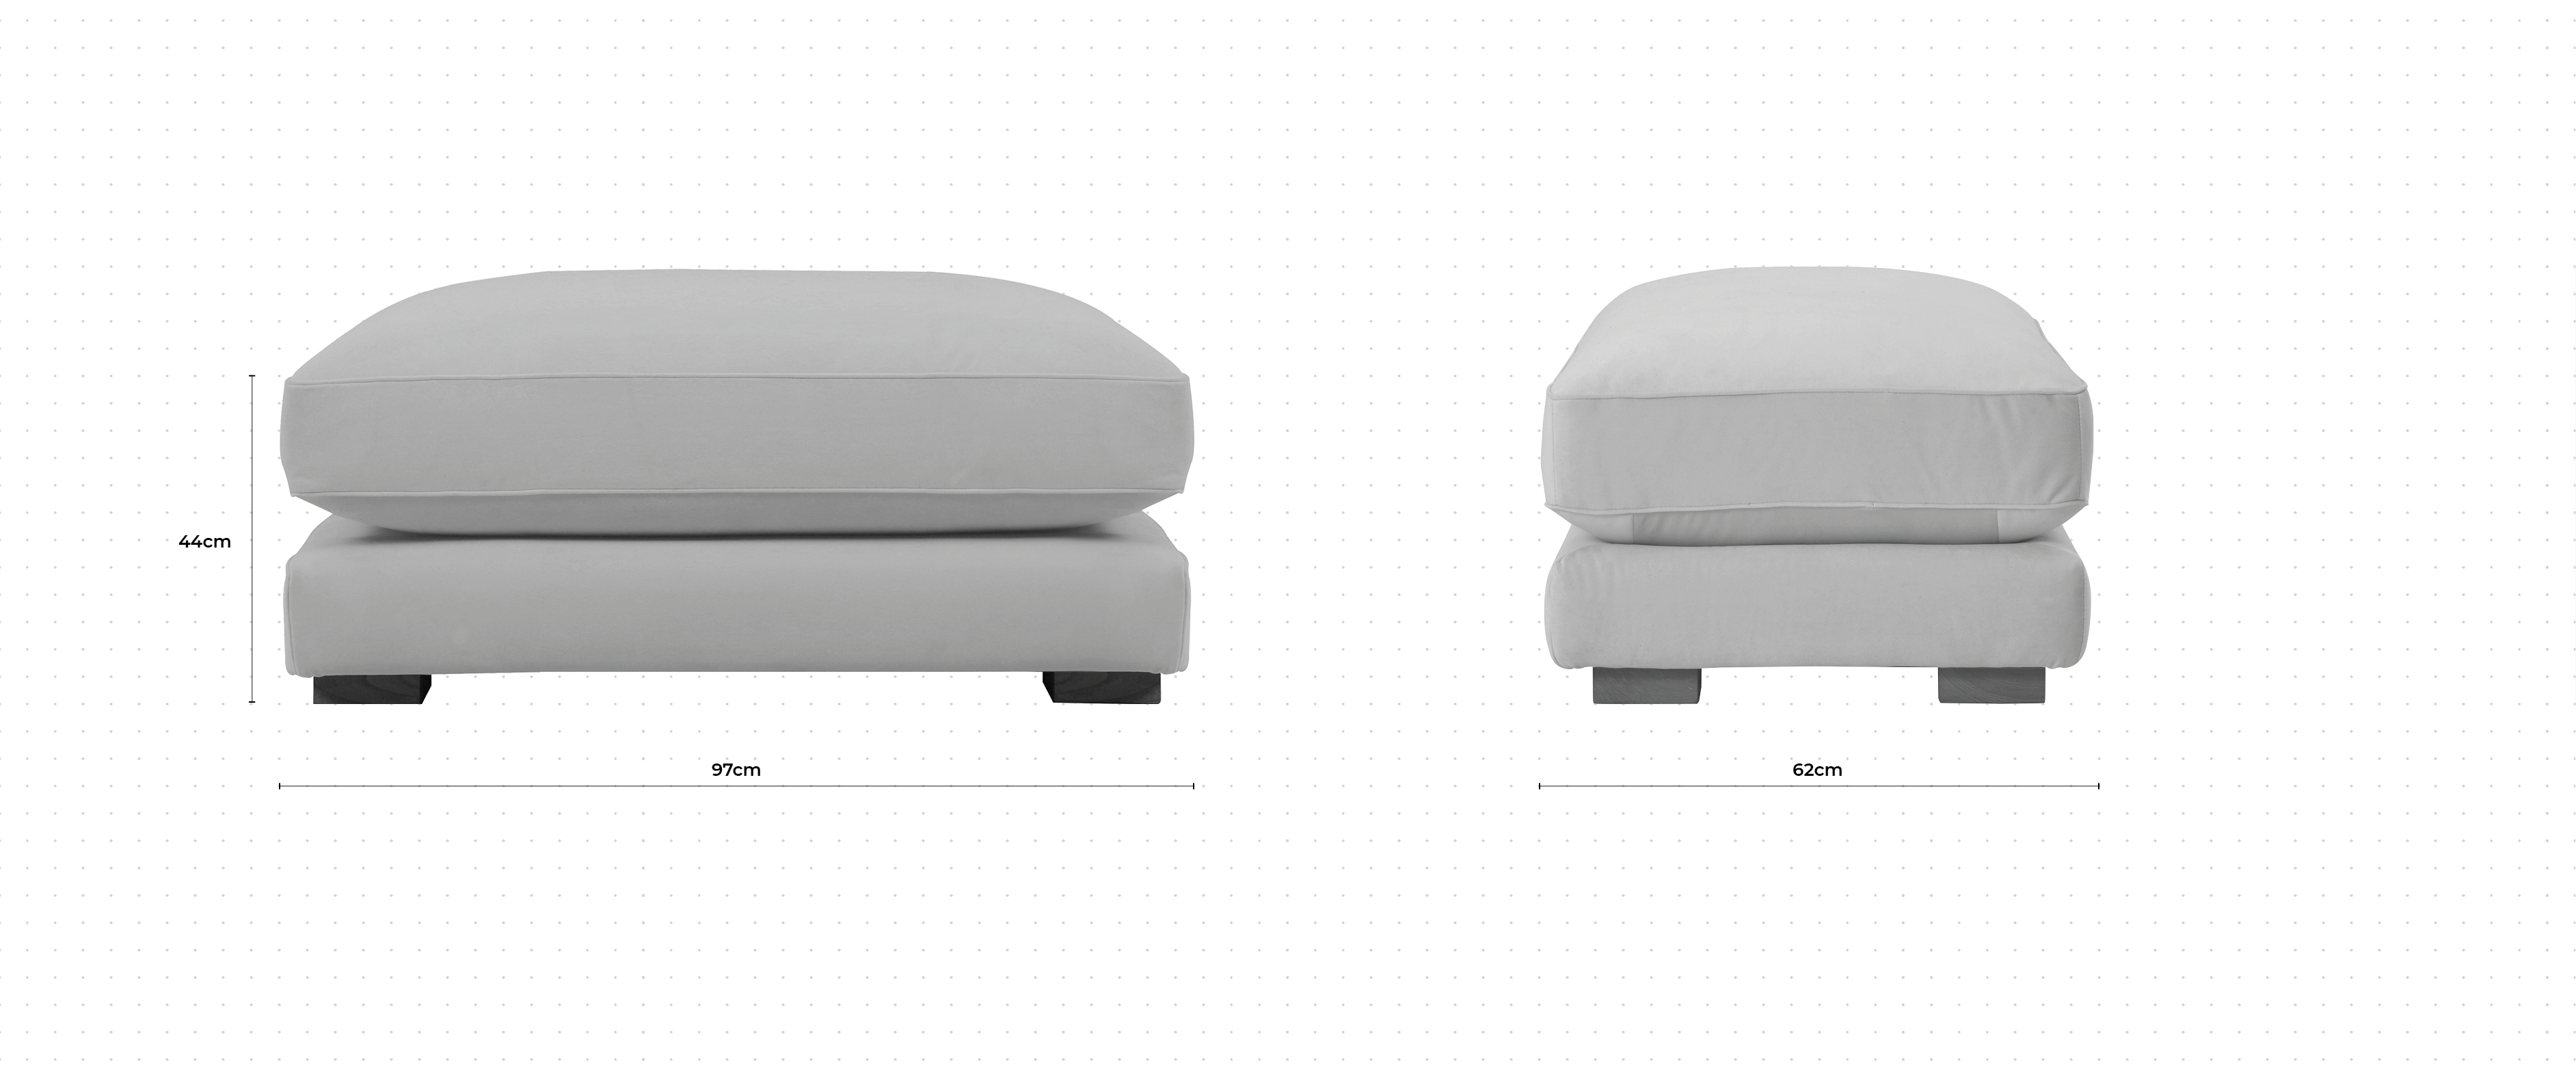 Dillon Footstool dimensions